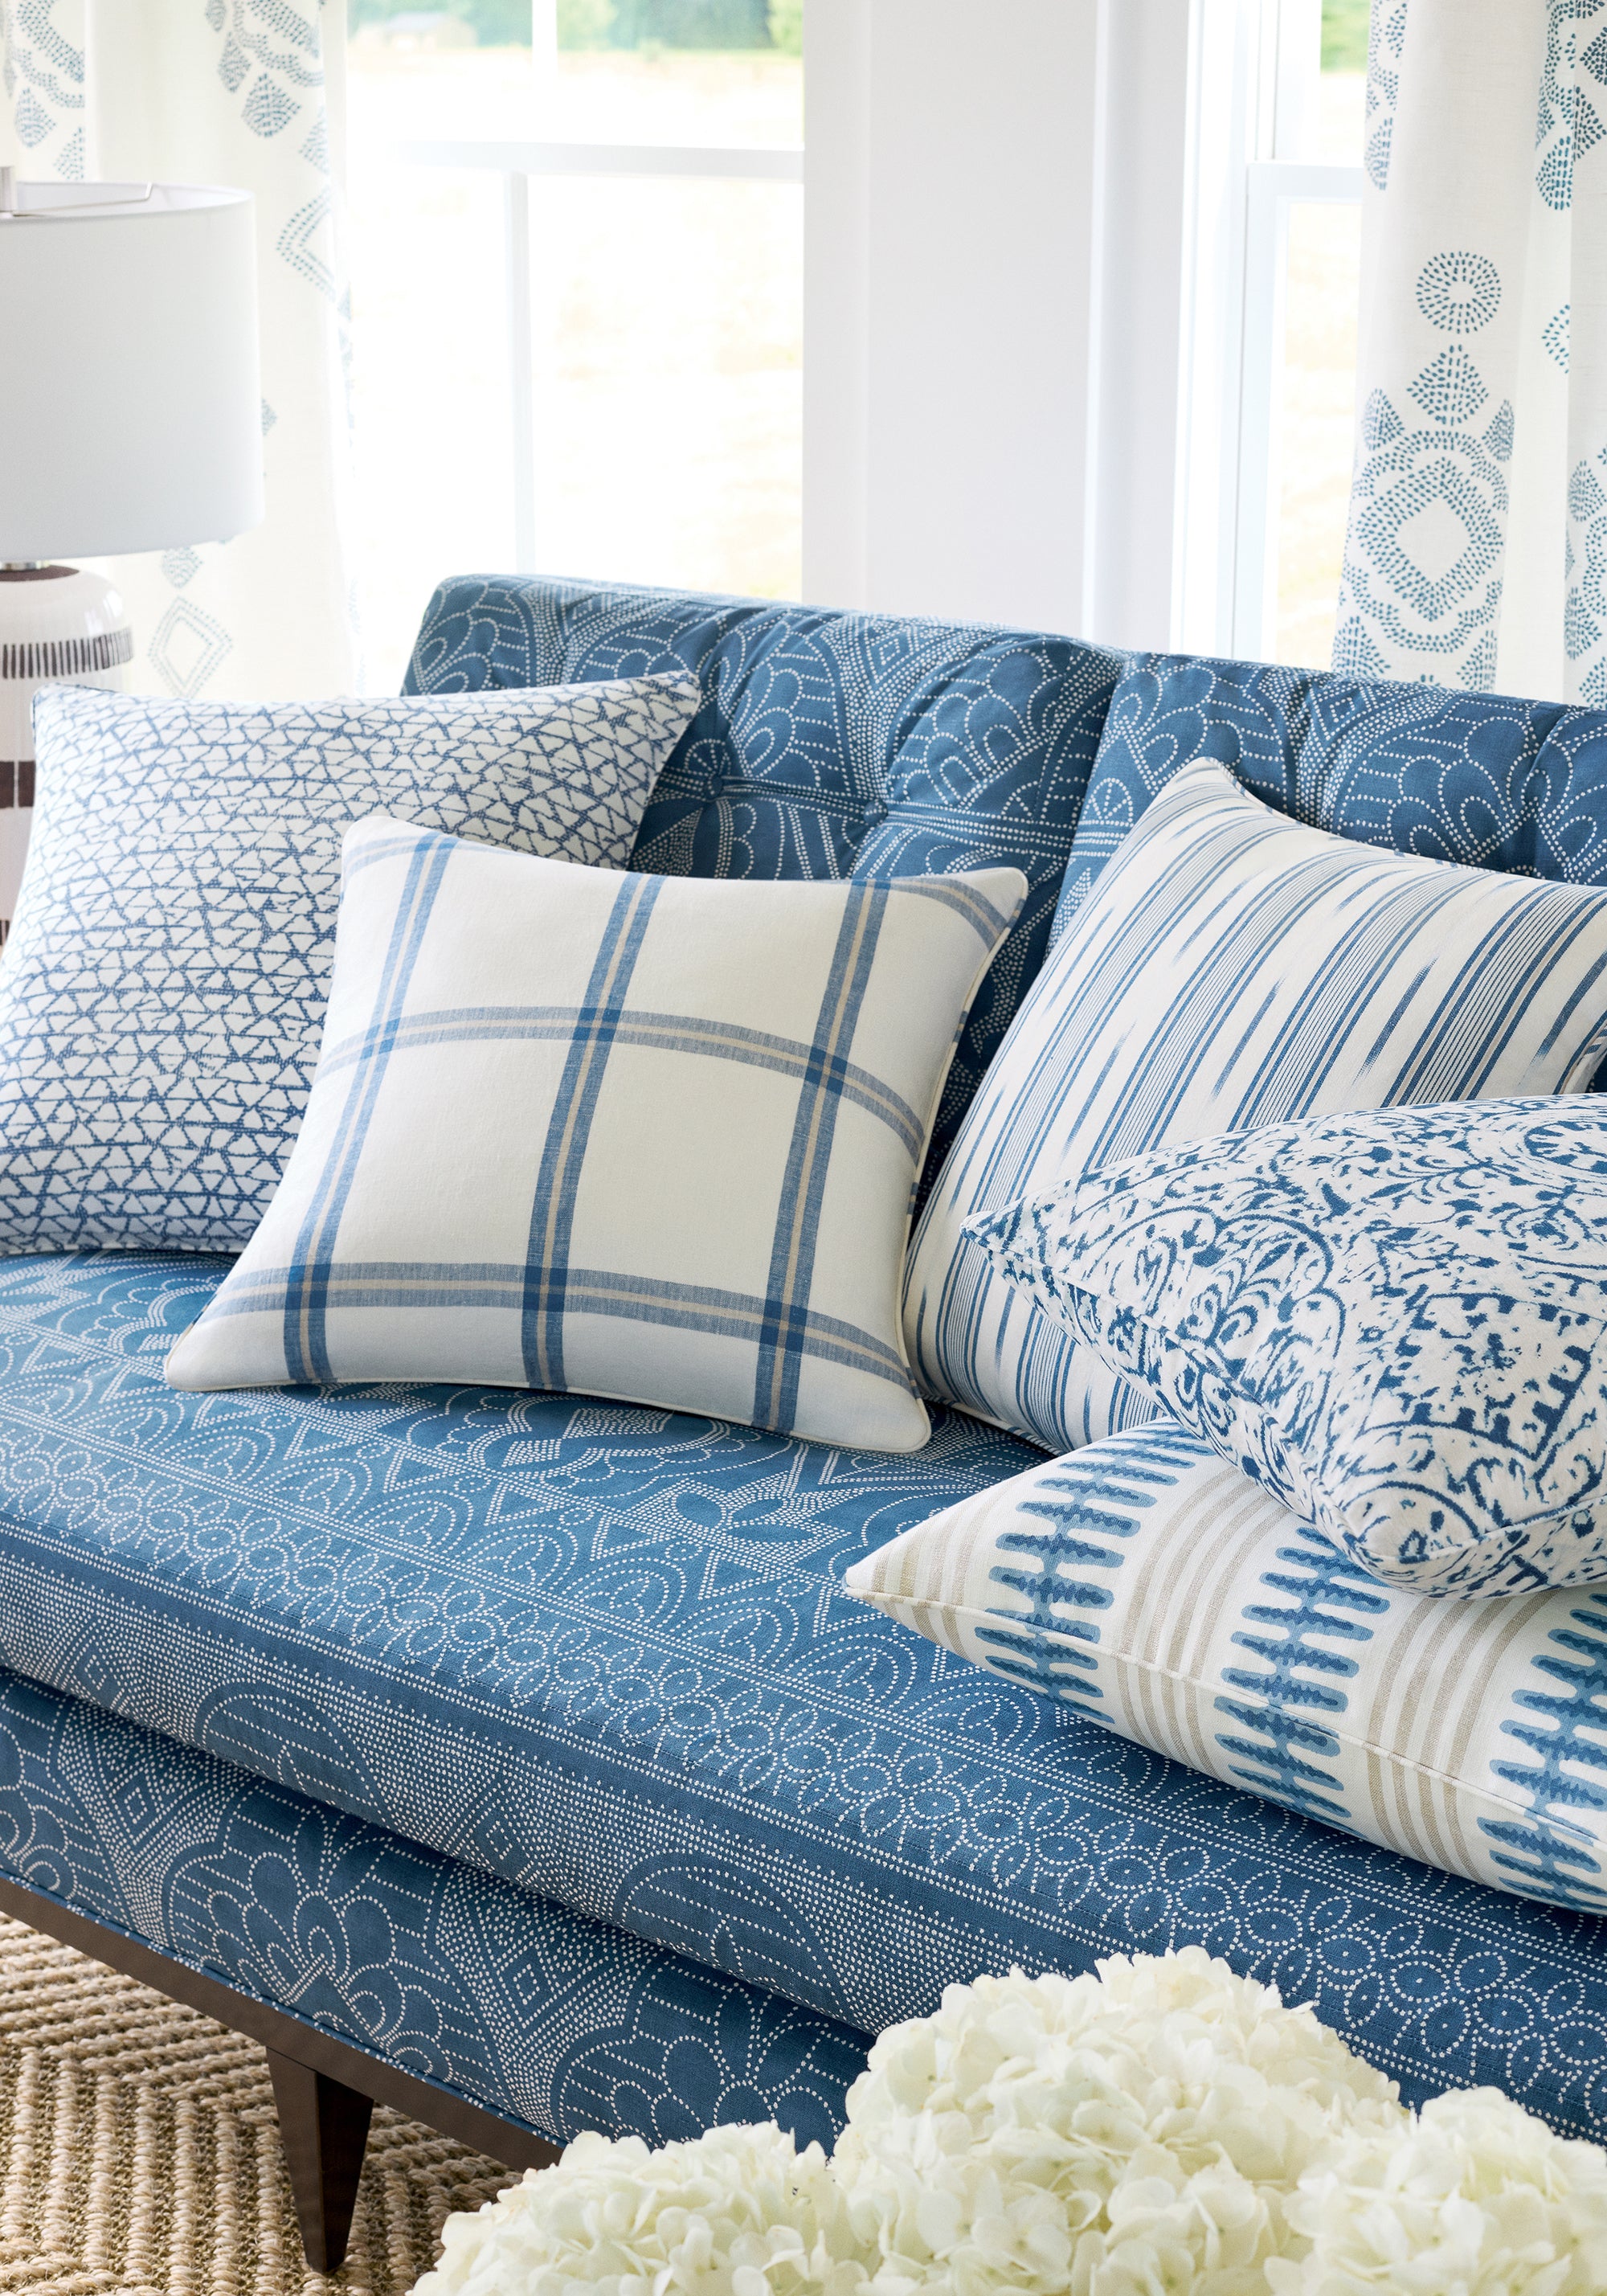 Couch in Medinas fabric in navy color - pattern number F981303 - by Thibaut in the Montecito collection